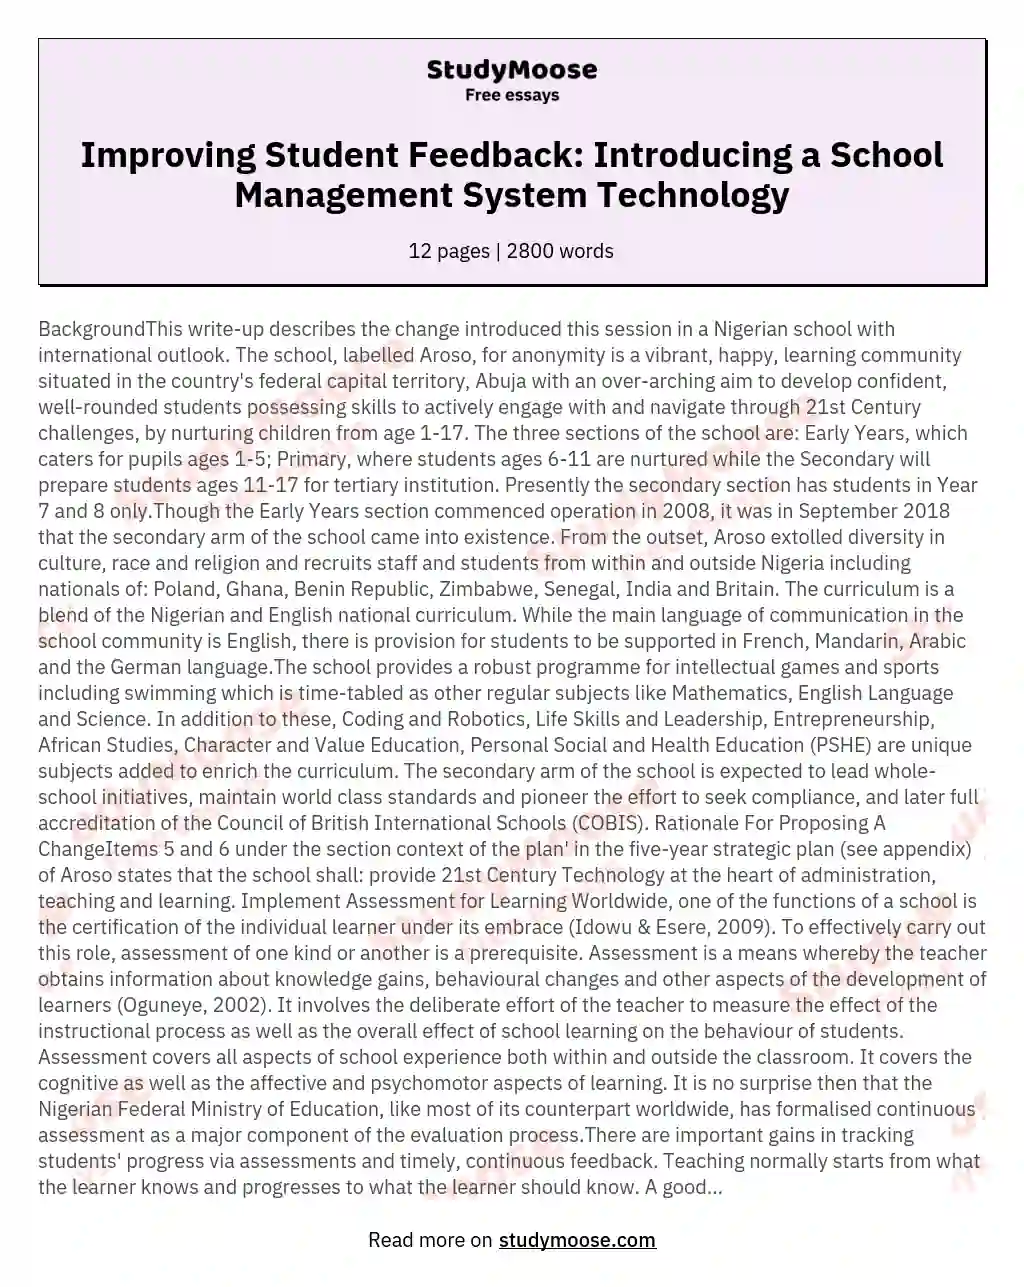 Improving Student Feedback: Introducing a School Management System Technology essay